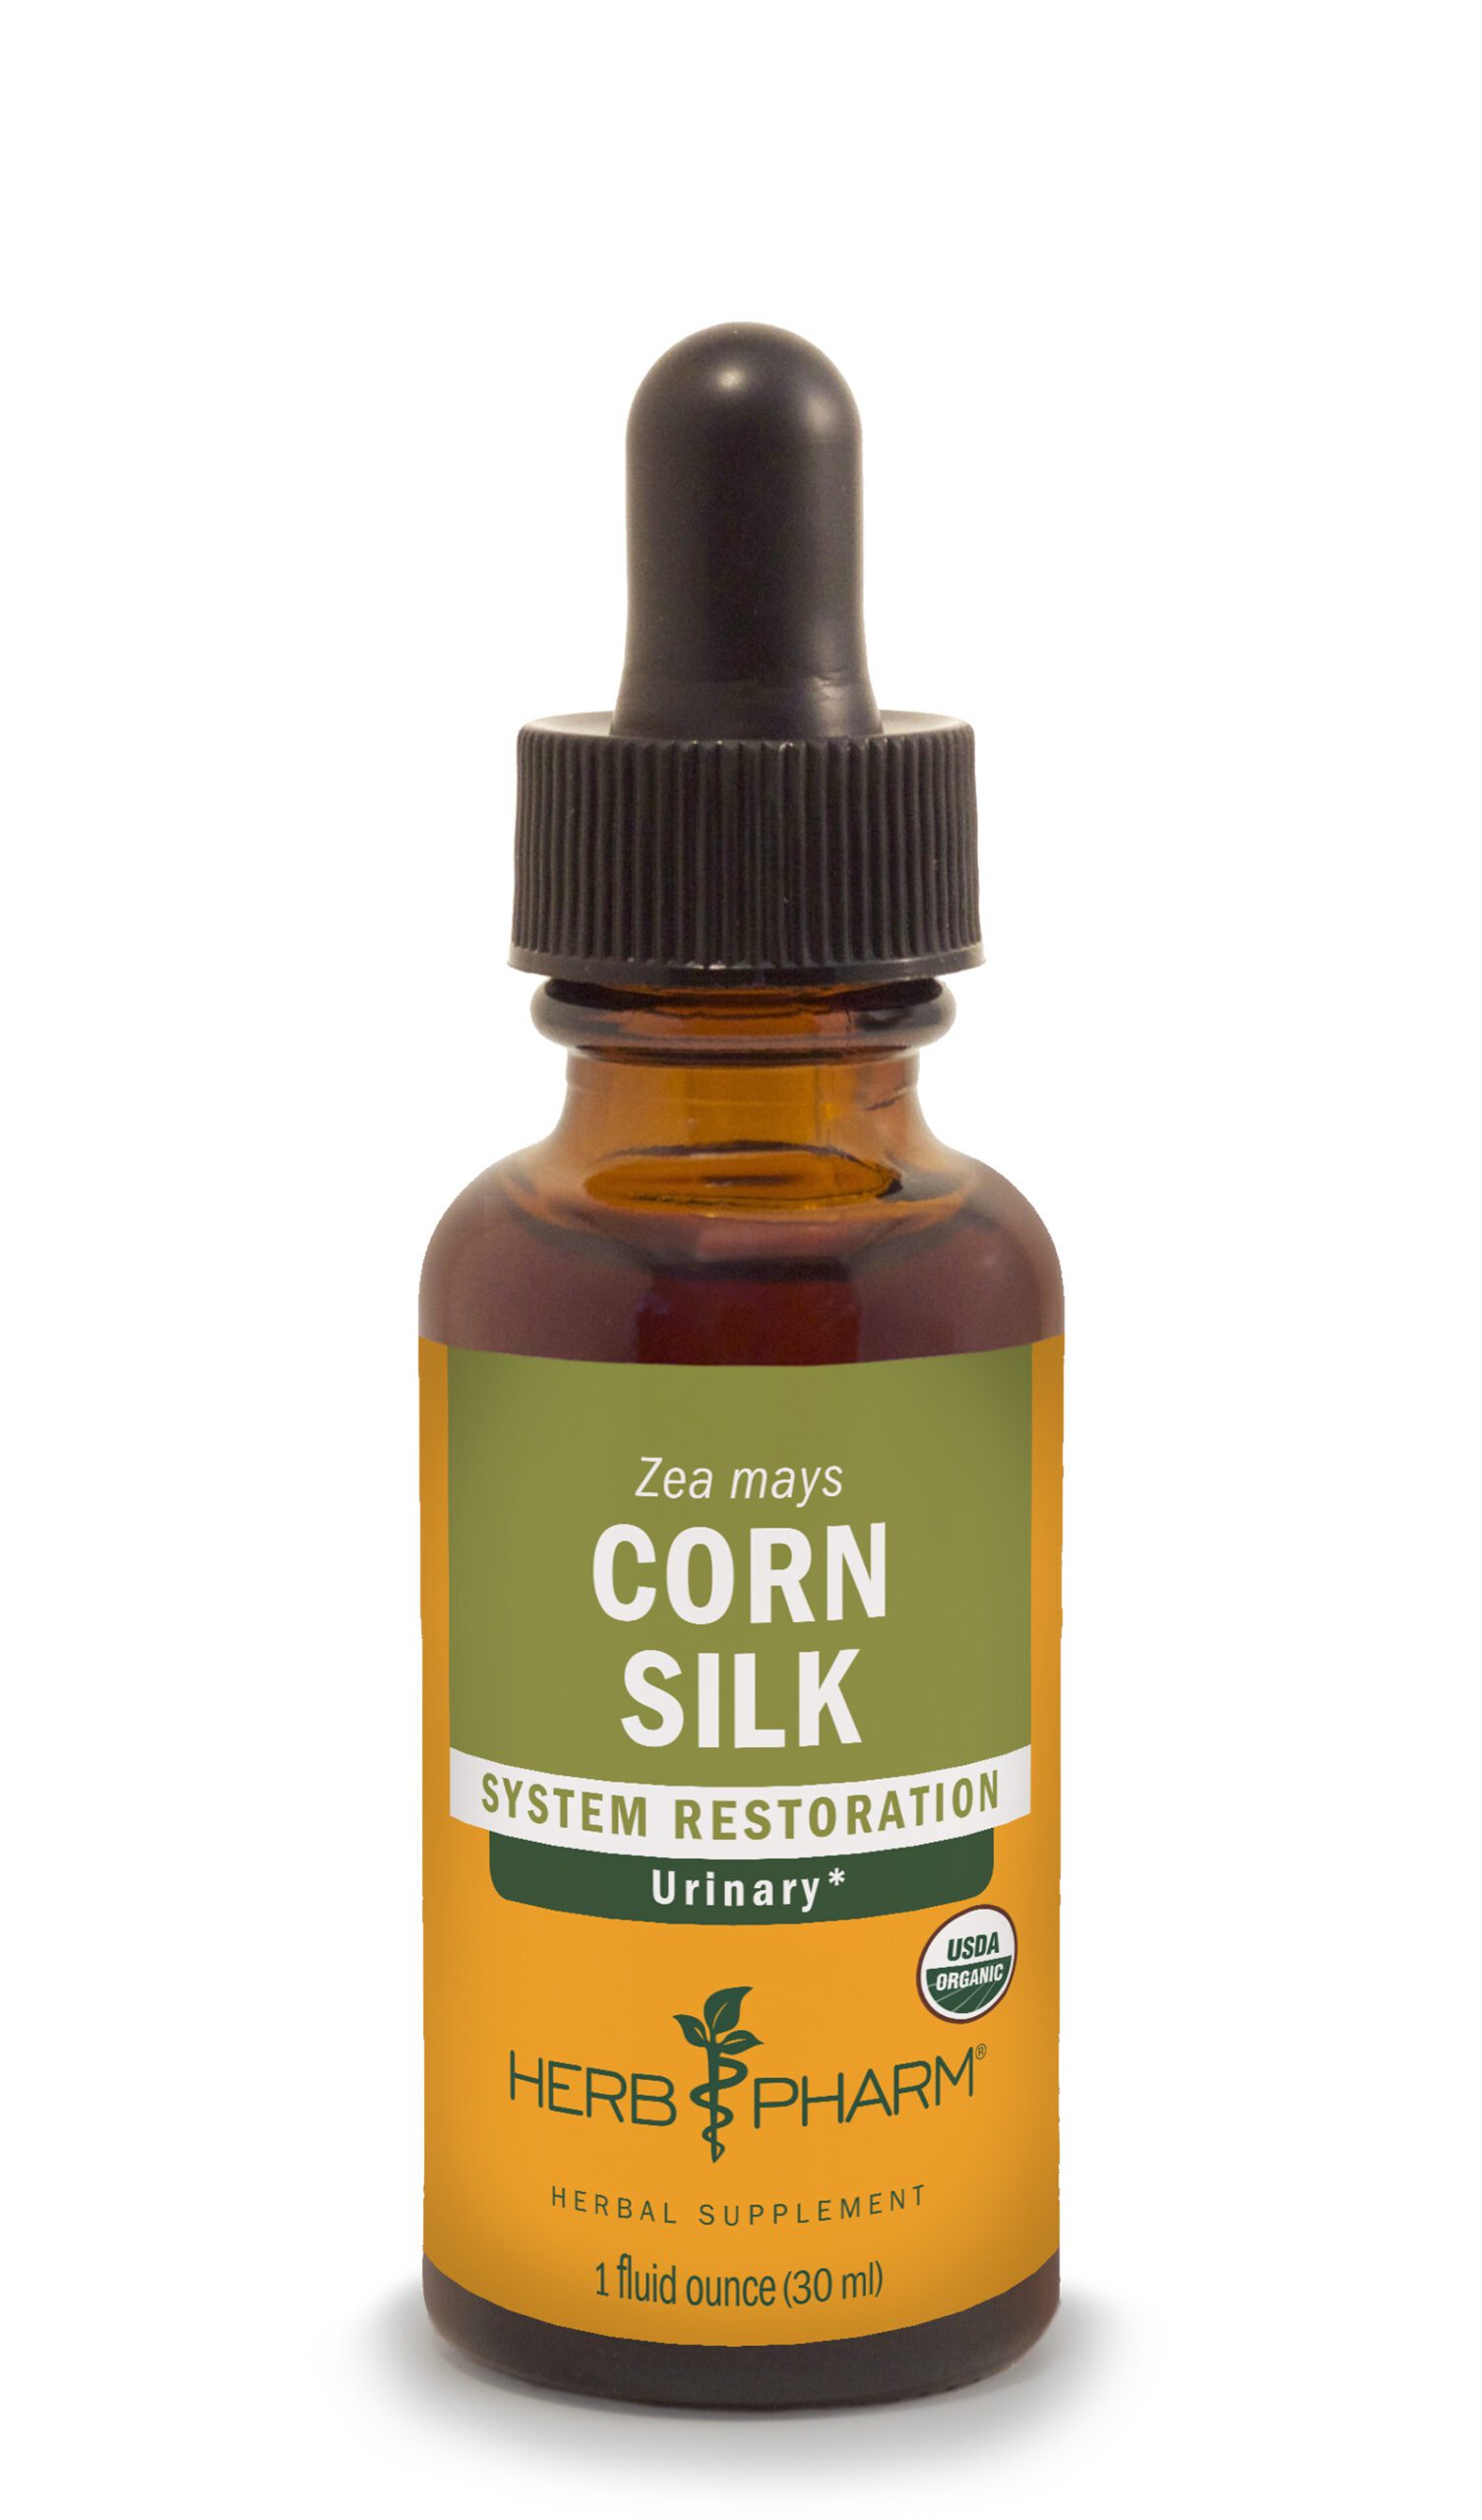 Product Listing Image for Herb Pharm Corn Silk Tincture 1oz